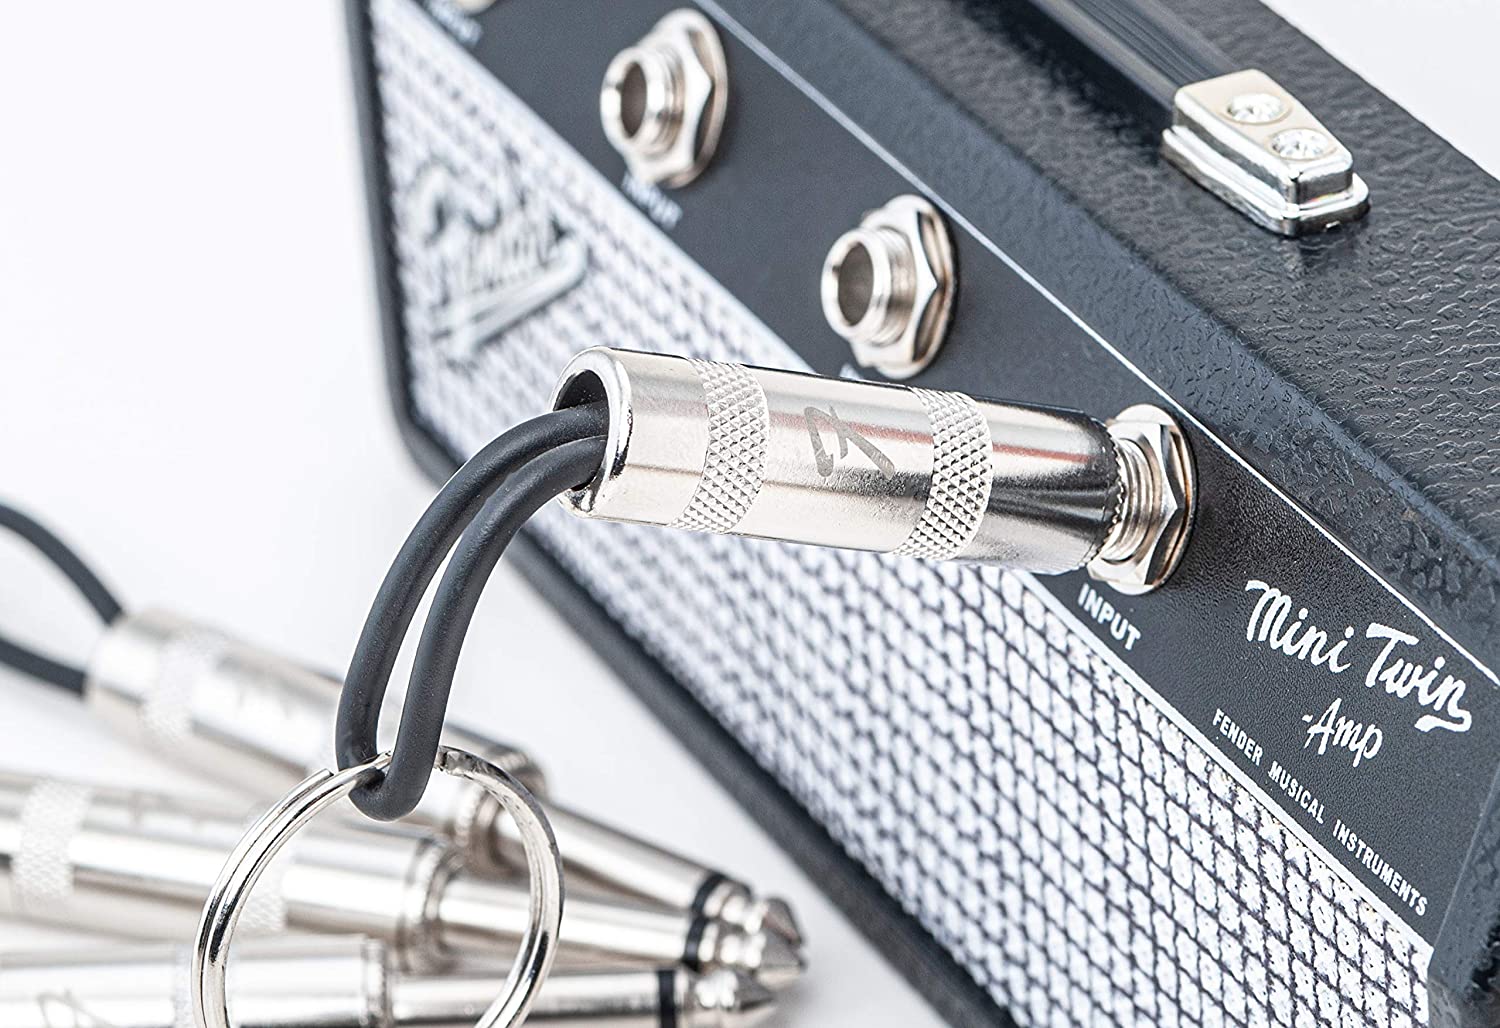 A close up view of a Fender key holder rack with one of the keychains plugged into one of the jacks.